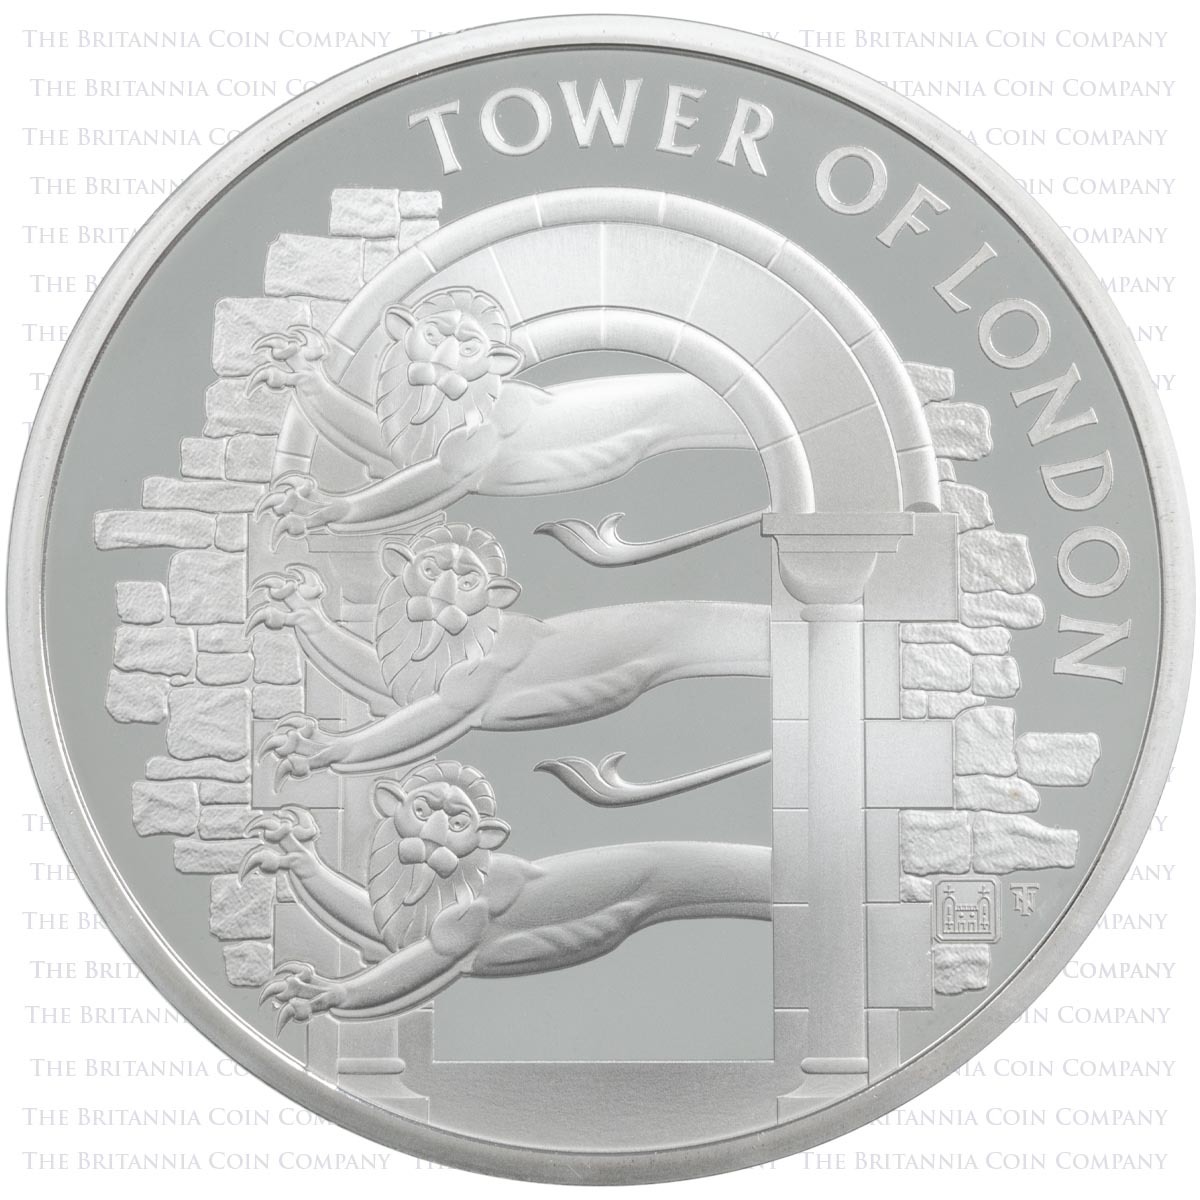 UK20MNSP 2020 Tower Of London Royal Menagerie Five Pound Silver Proof Coin Reverse